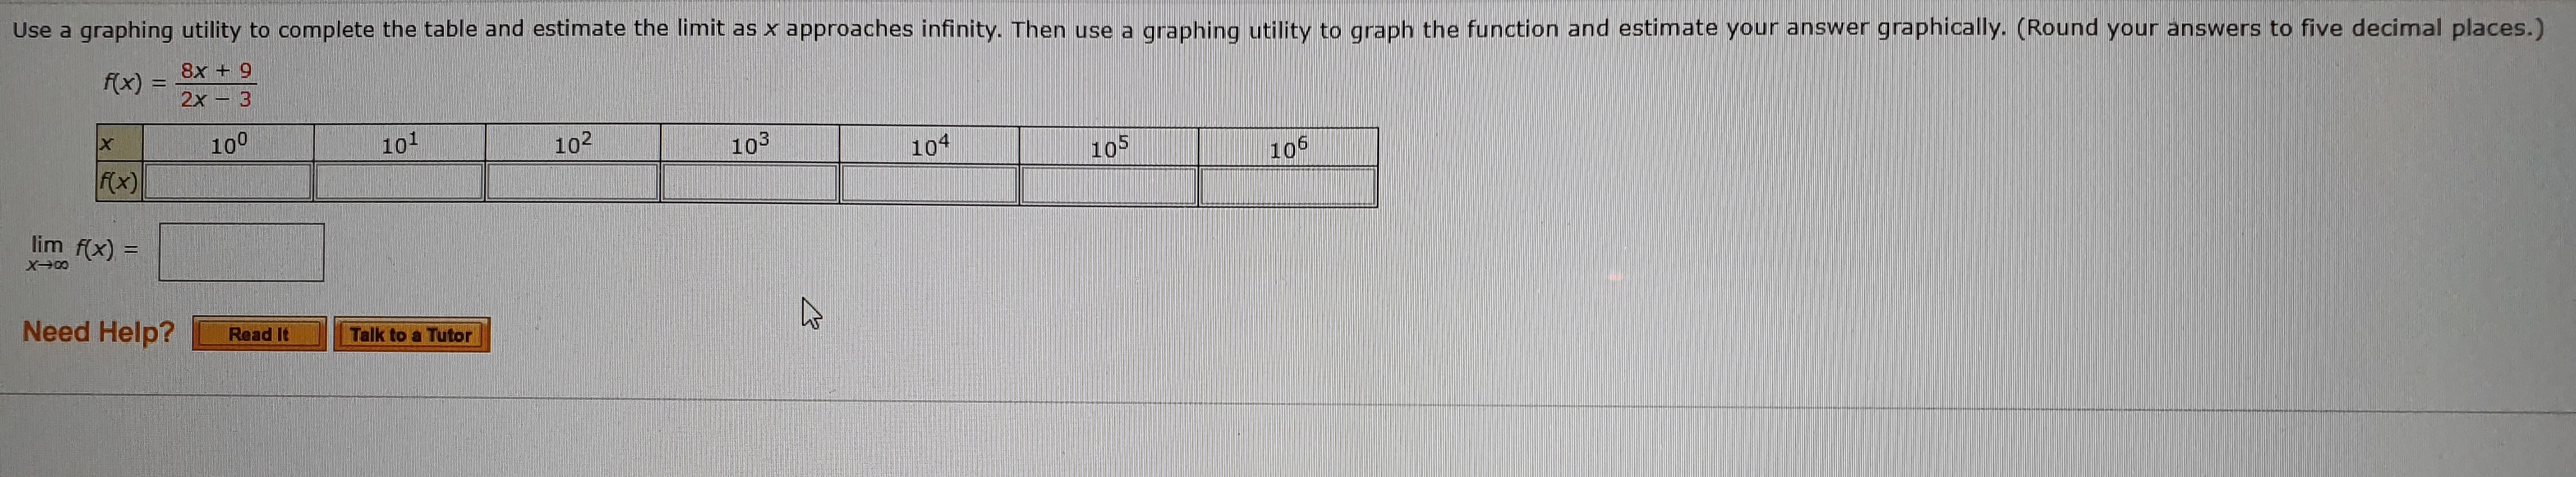 Use a graphing utility to complete the table and estimate the limit as x approaches infinity. Then use a
graphing utility to graph the function and estimate your answer graphically. (Round your answers to five decimal places.)
8x + 9
2x3
f(x)
100
101
102
103
104
105
106
f(x)
lim f(x)
Need Help?
Read It
Talk to a Tutor
